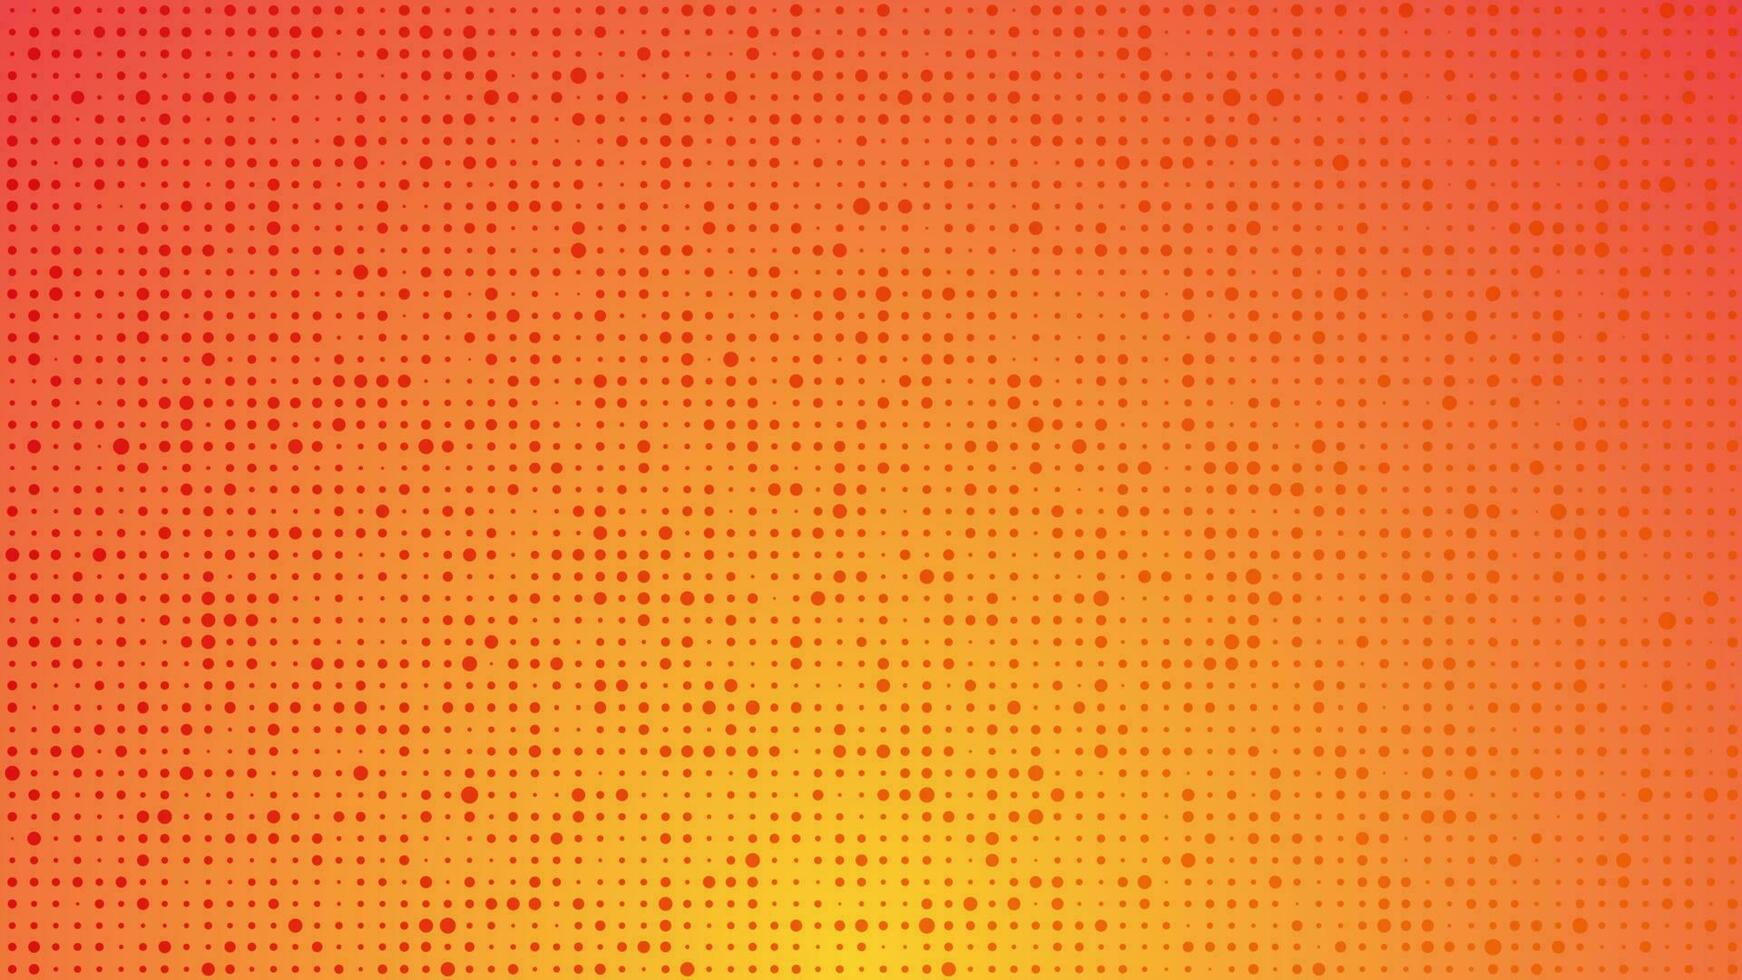 Abstract geometric gradient circles background. Orange dot background with empty space. Vector illustration.